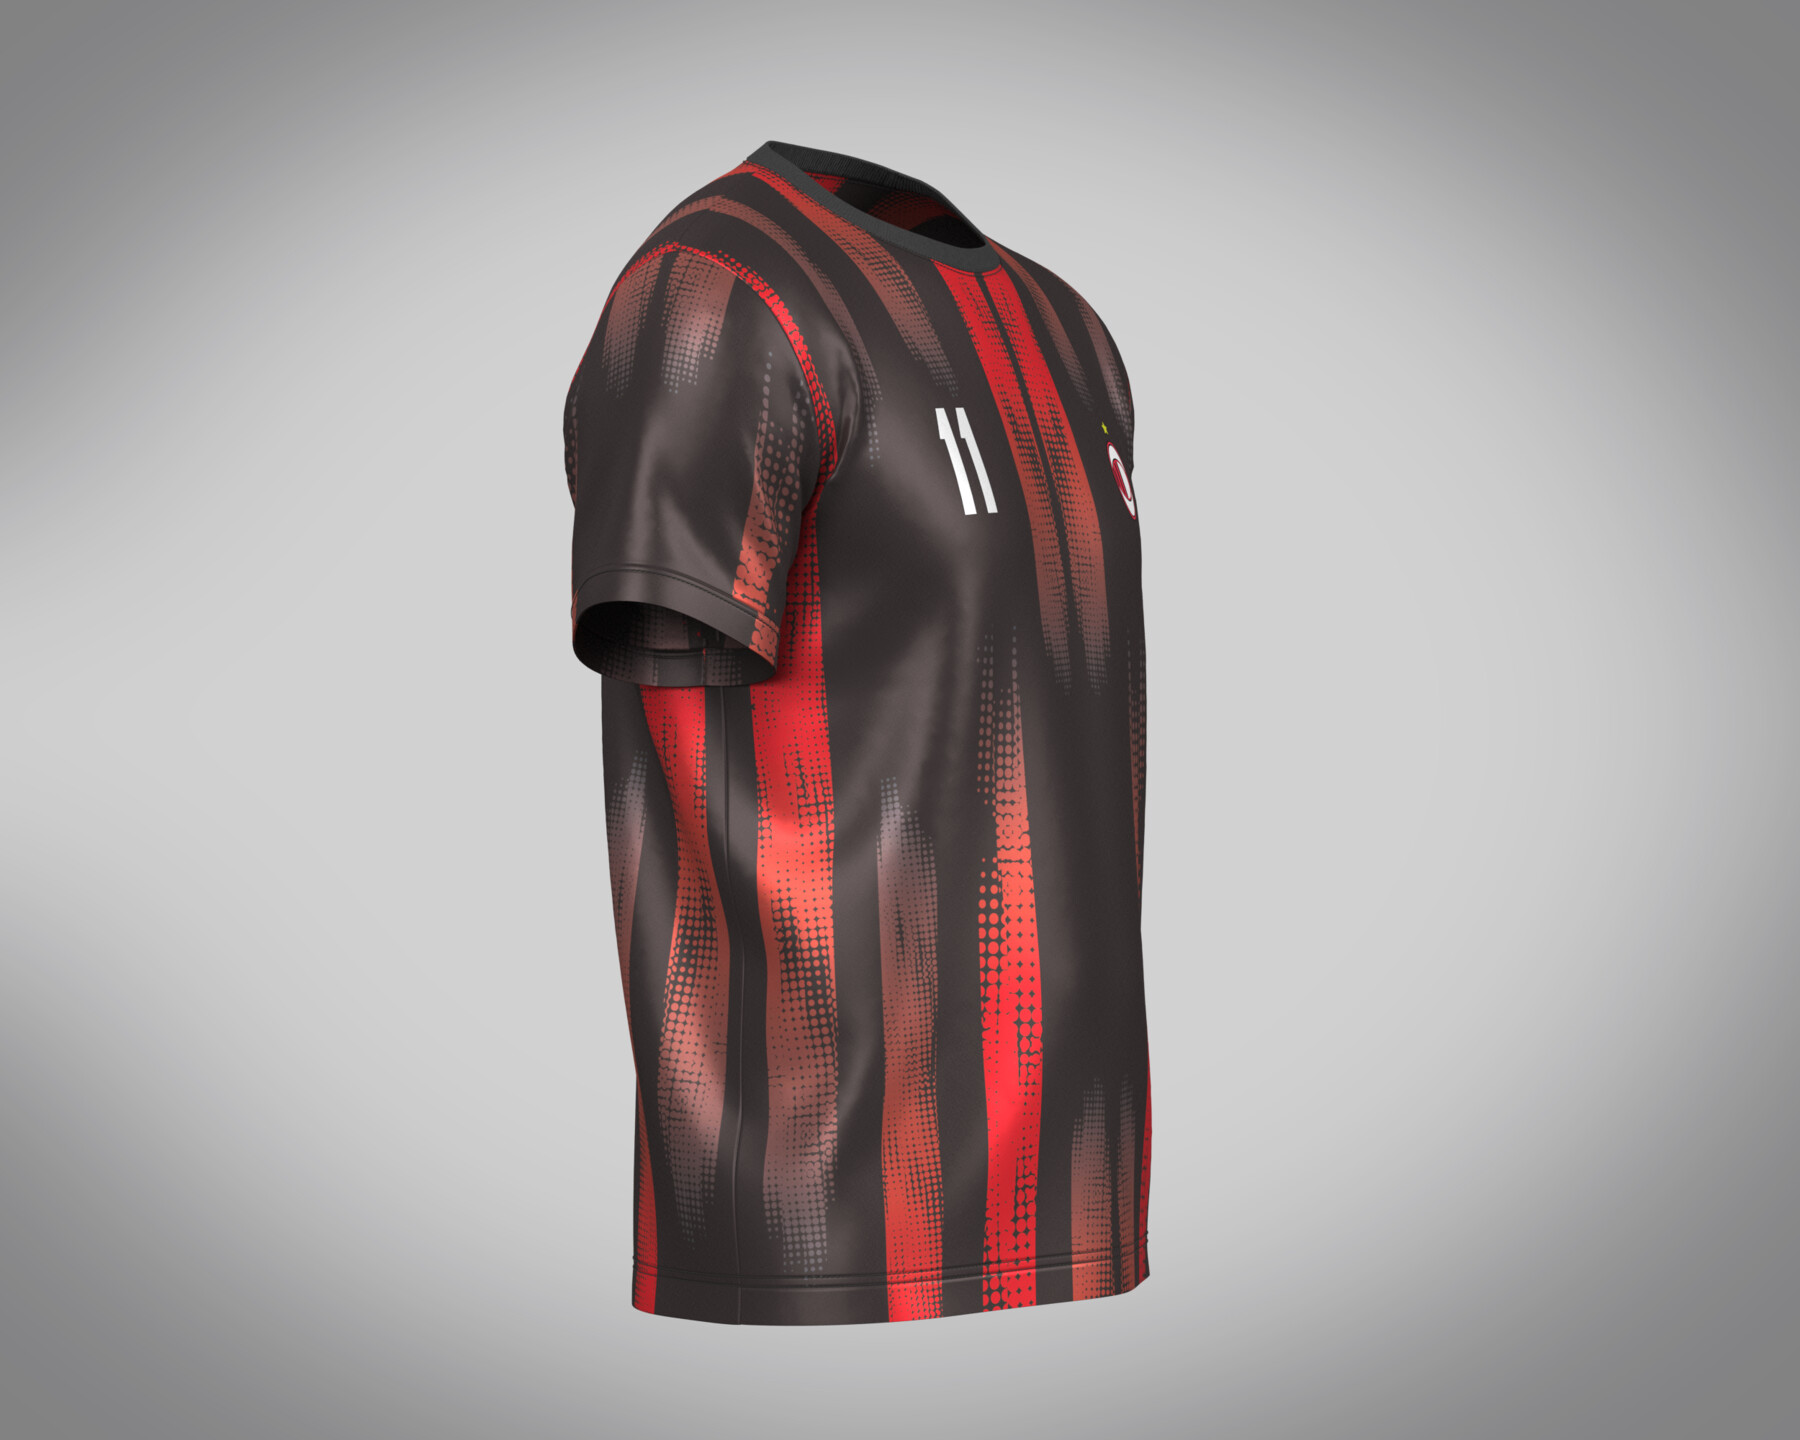 ArtStation - Soccer Black and Red Jersey Player-04